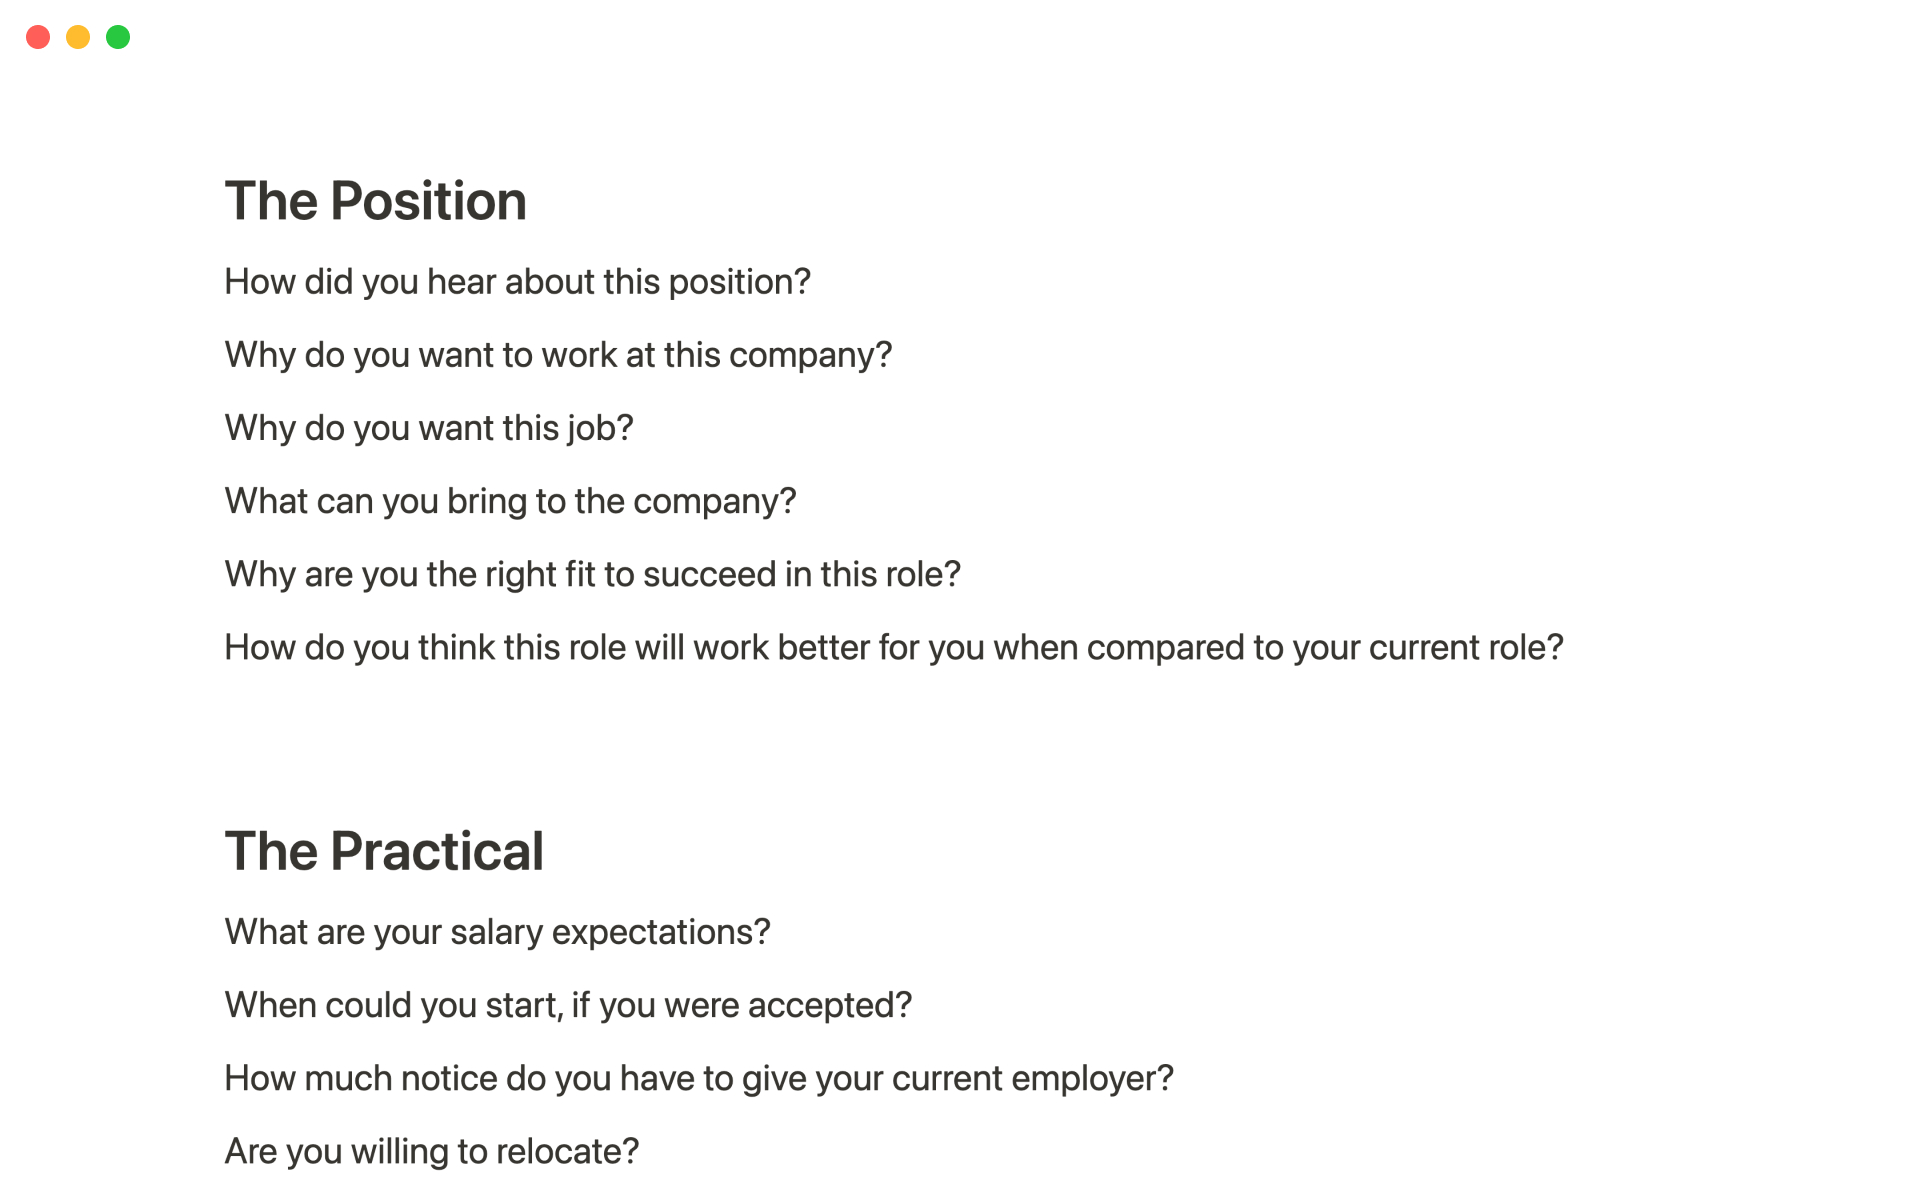 Ensure you have the perfect set of interview questions available.